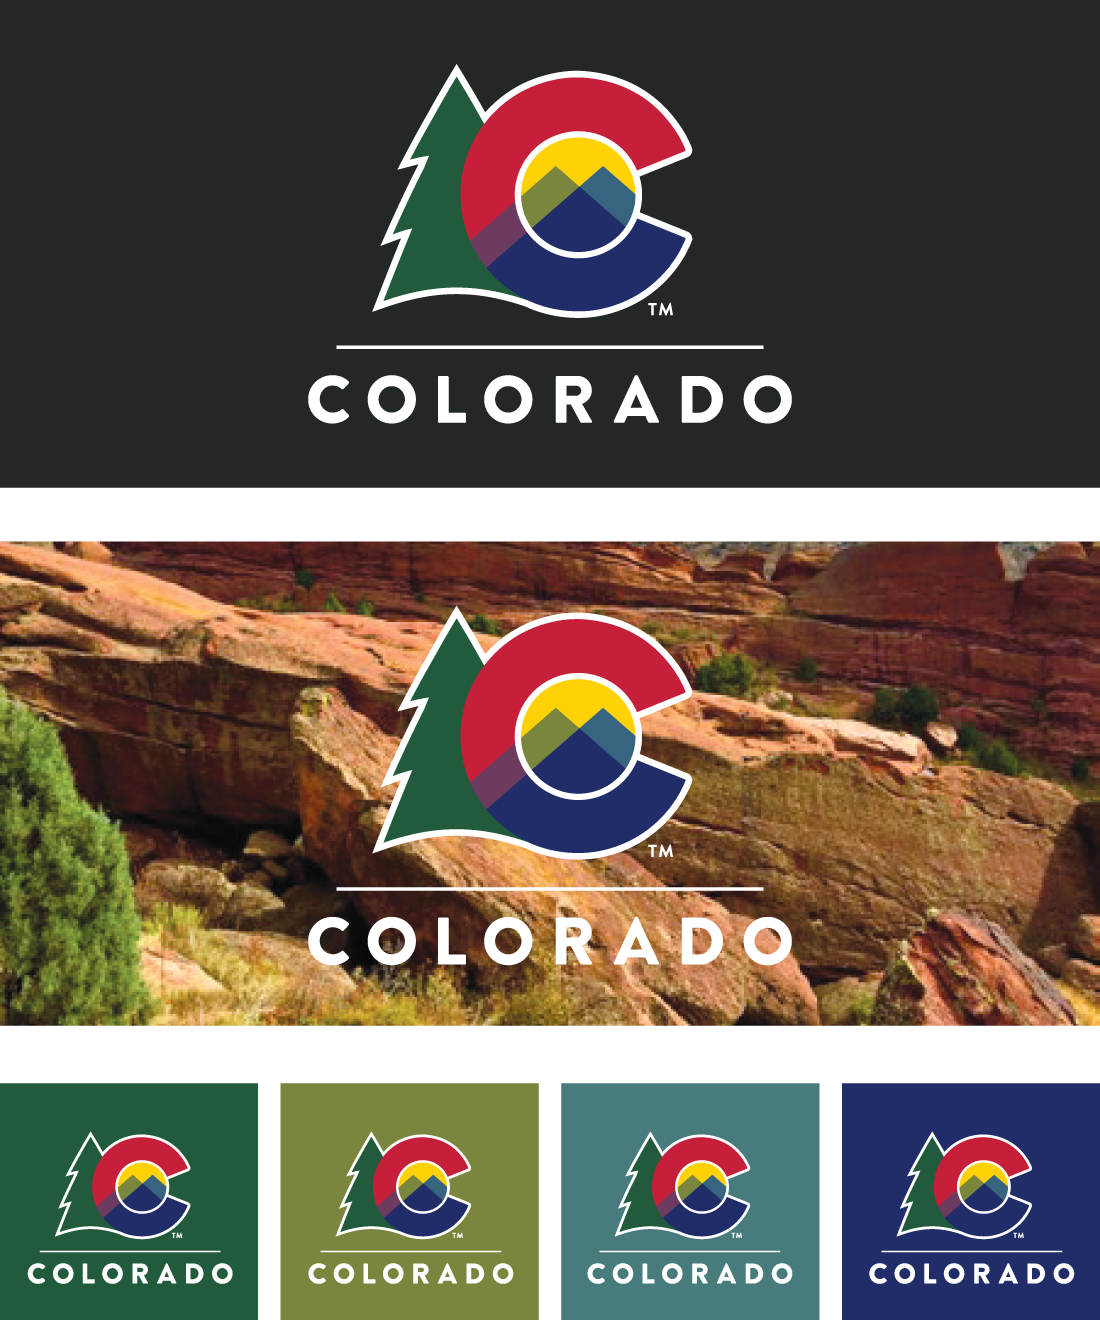 six examples of how to use the reversed primary logo on a colored or raster background